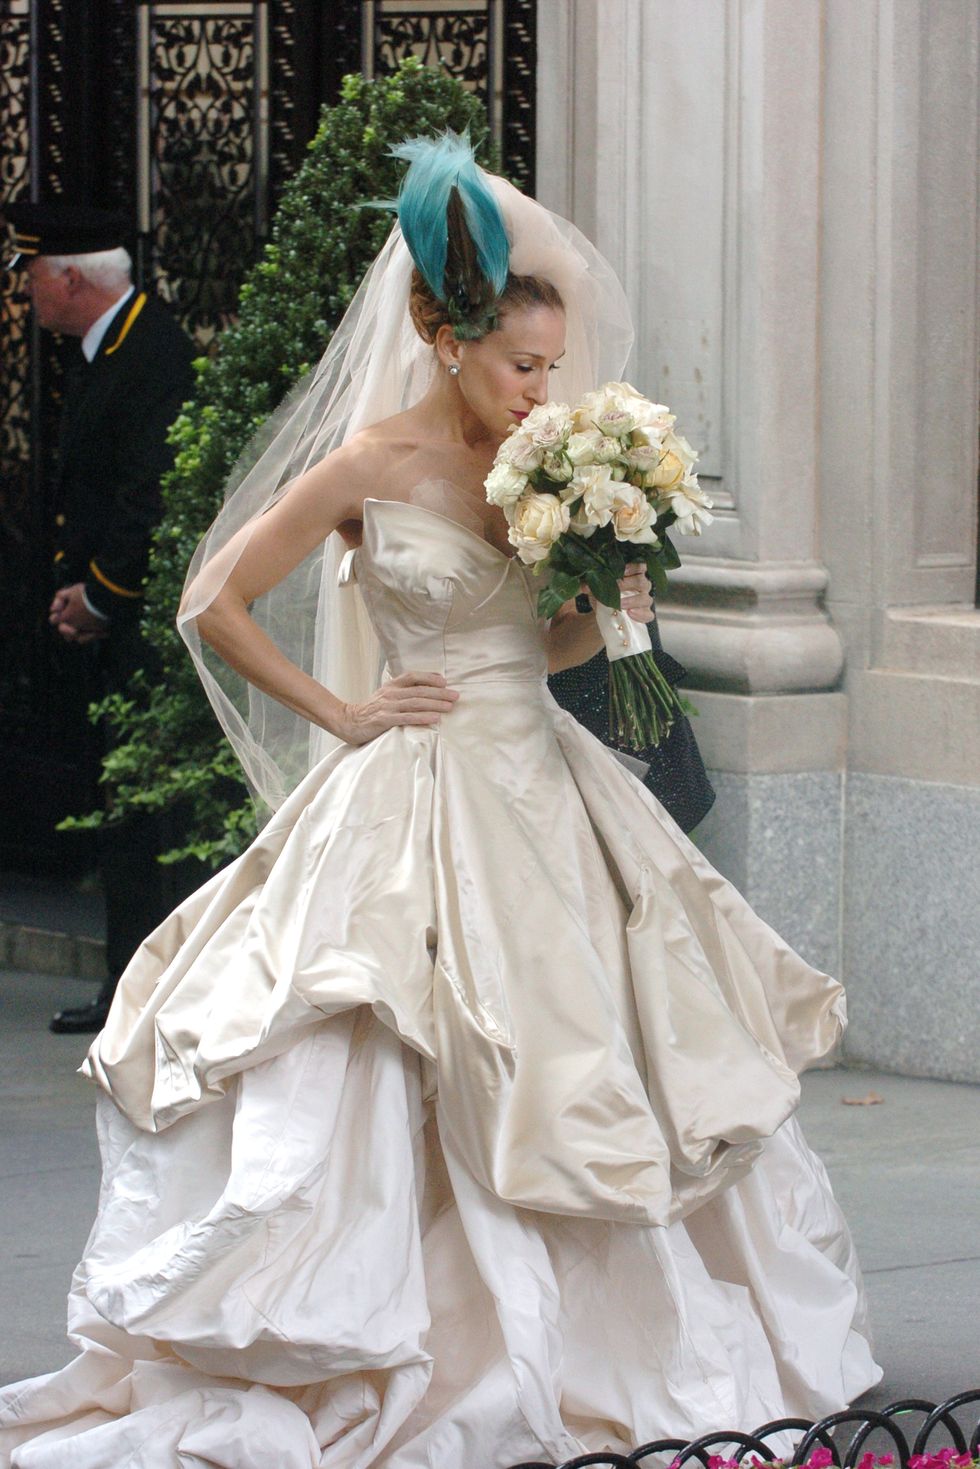 Carrie Bradshaw's wedding dress by Vivienne Westwood sold out